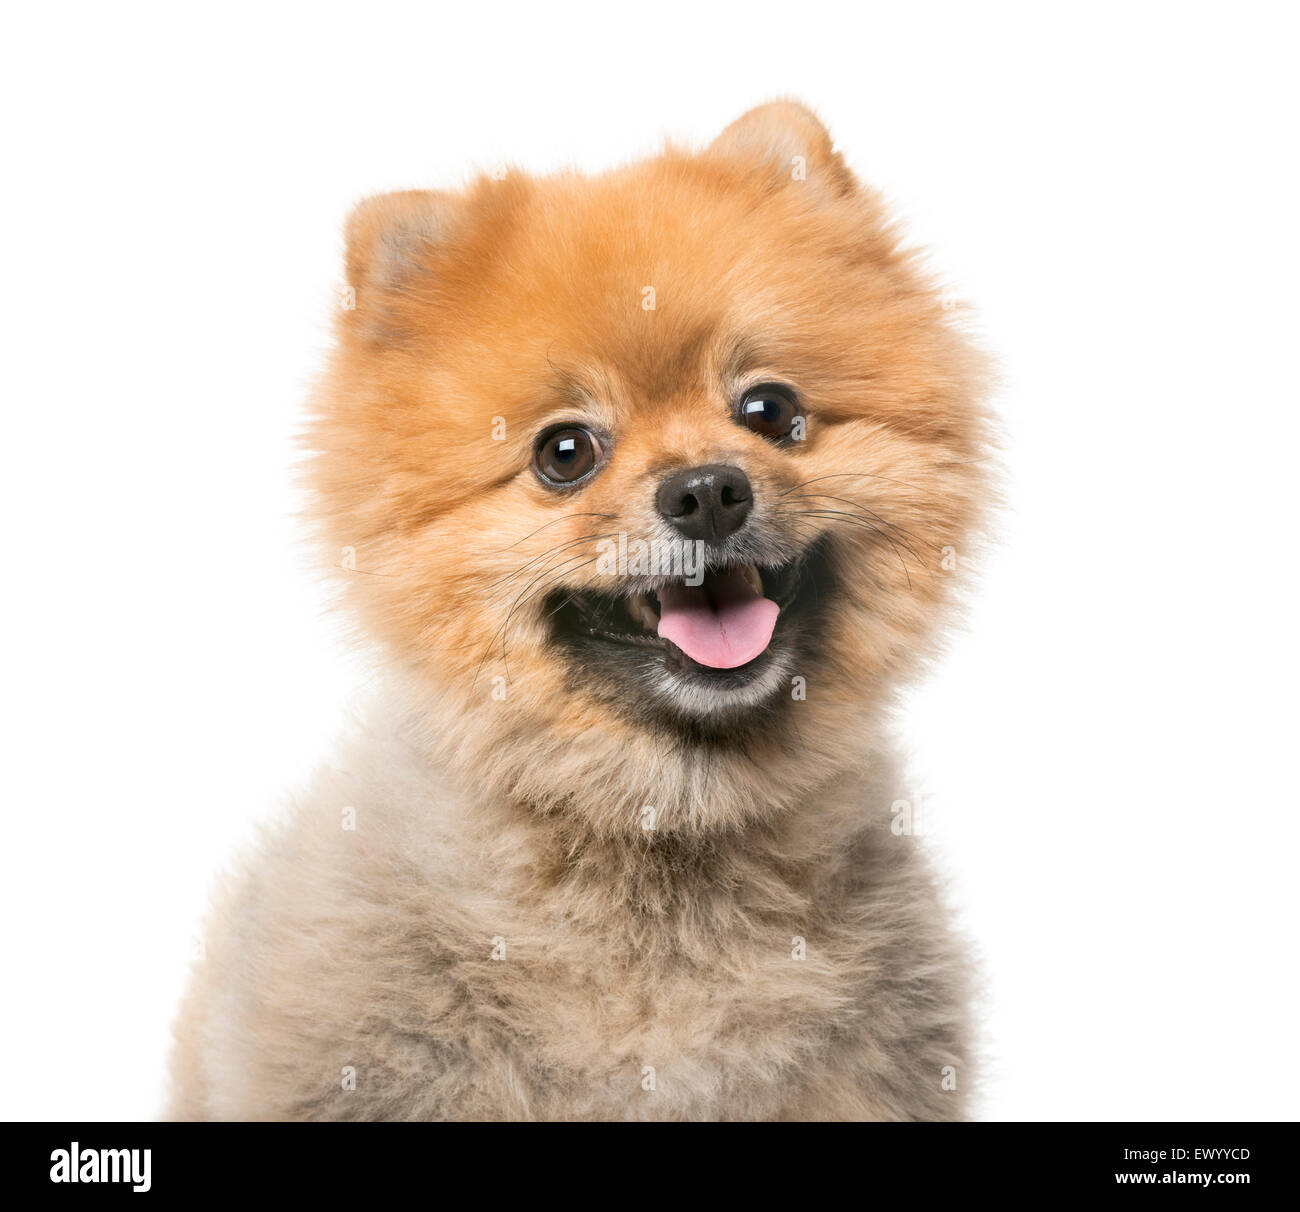 Pomeranian (3 years old) in front of a white background Stock Photo